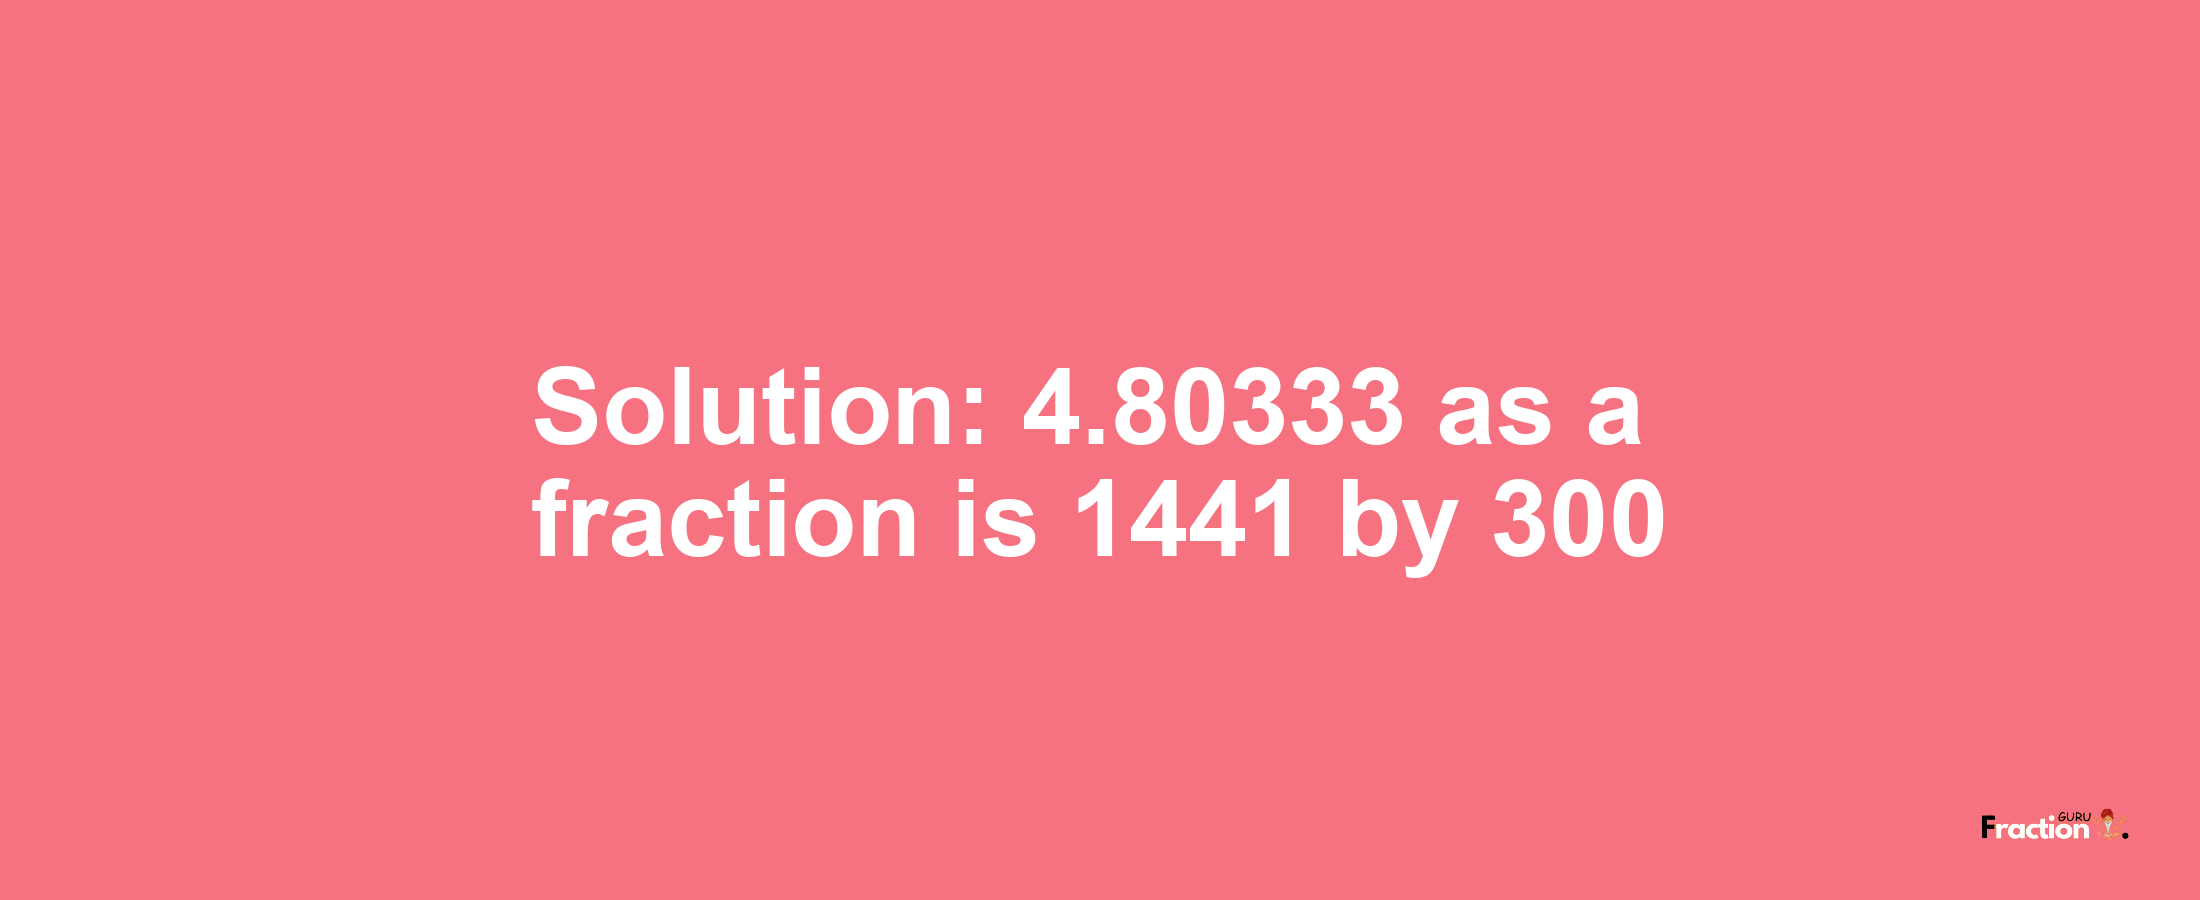 Solution:4.80333 as a fraction is 1441/300